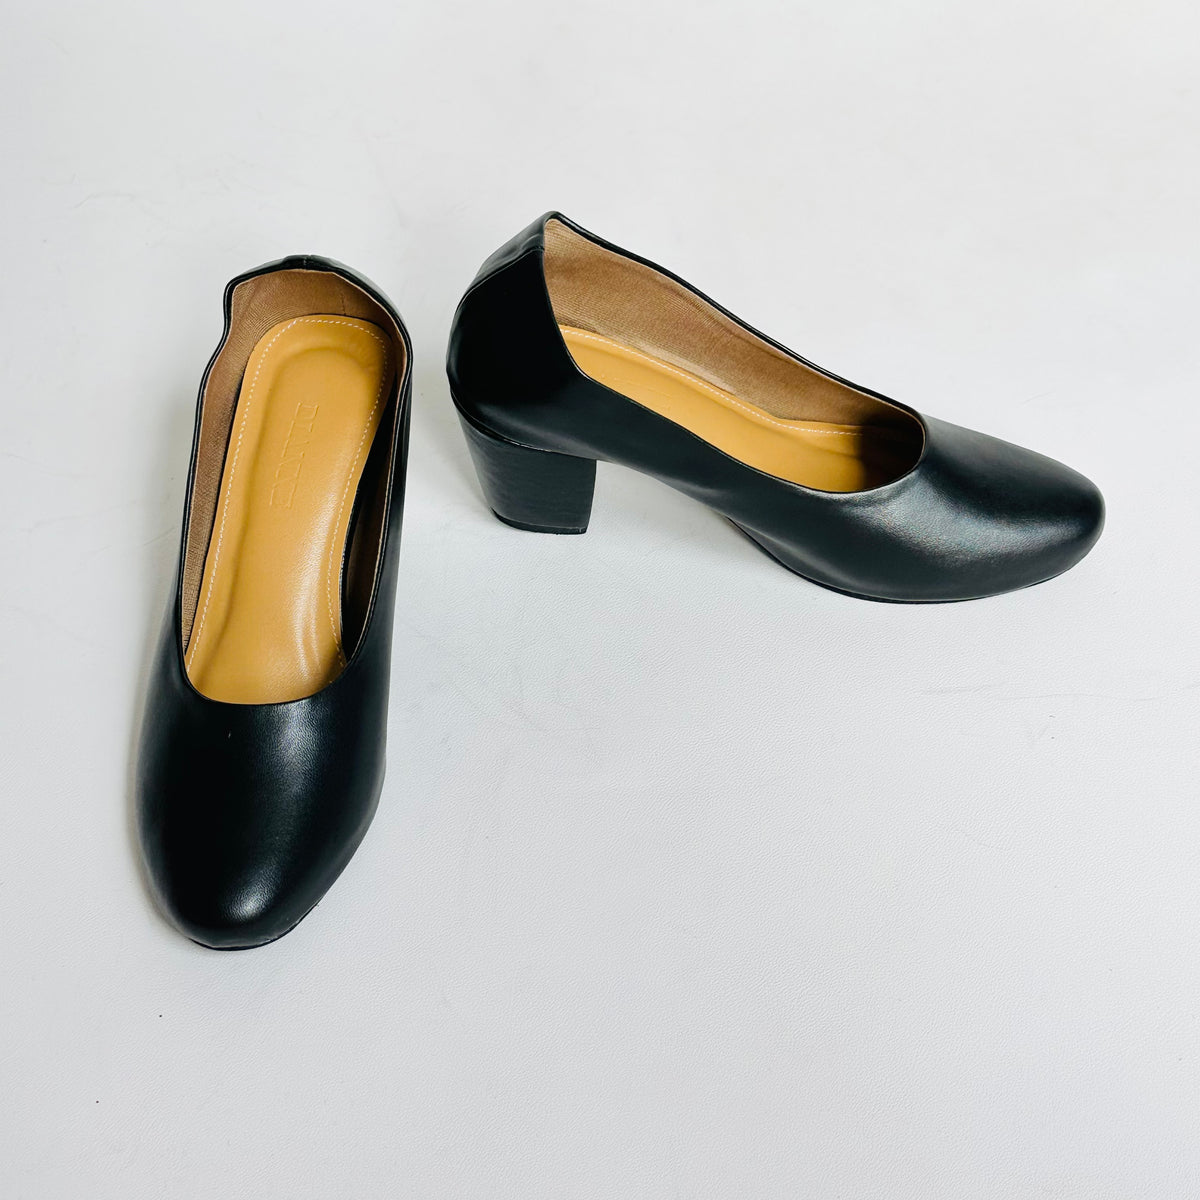 Kate Shoes Black Leather